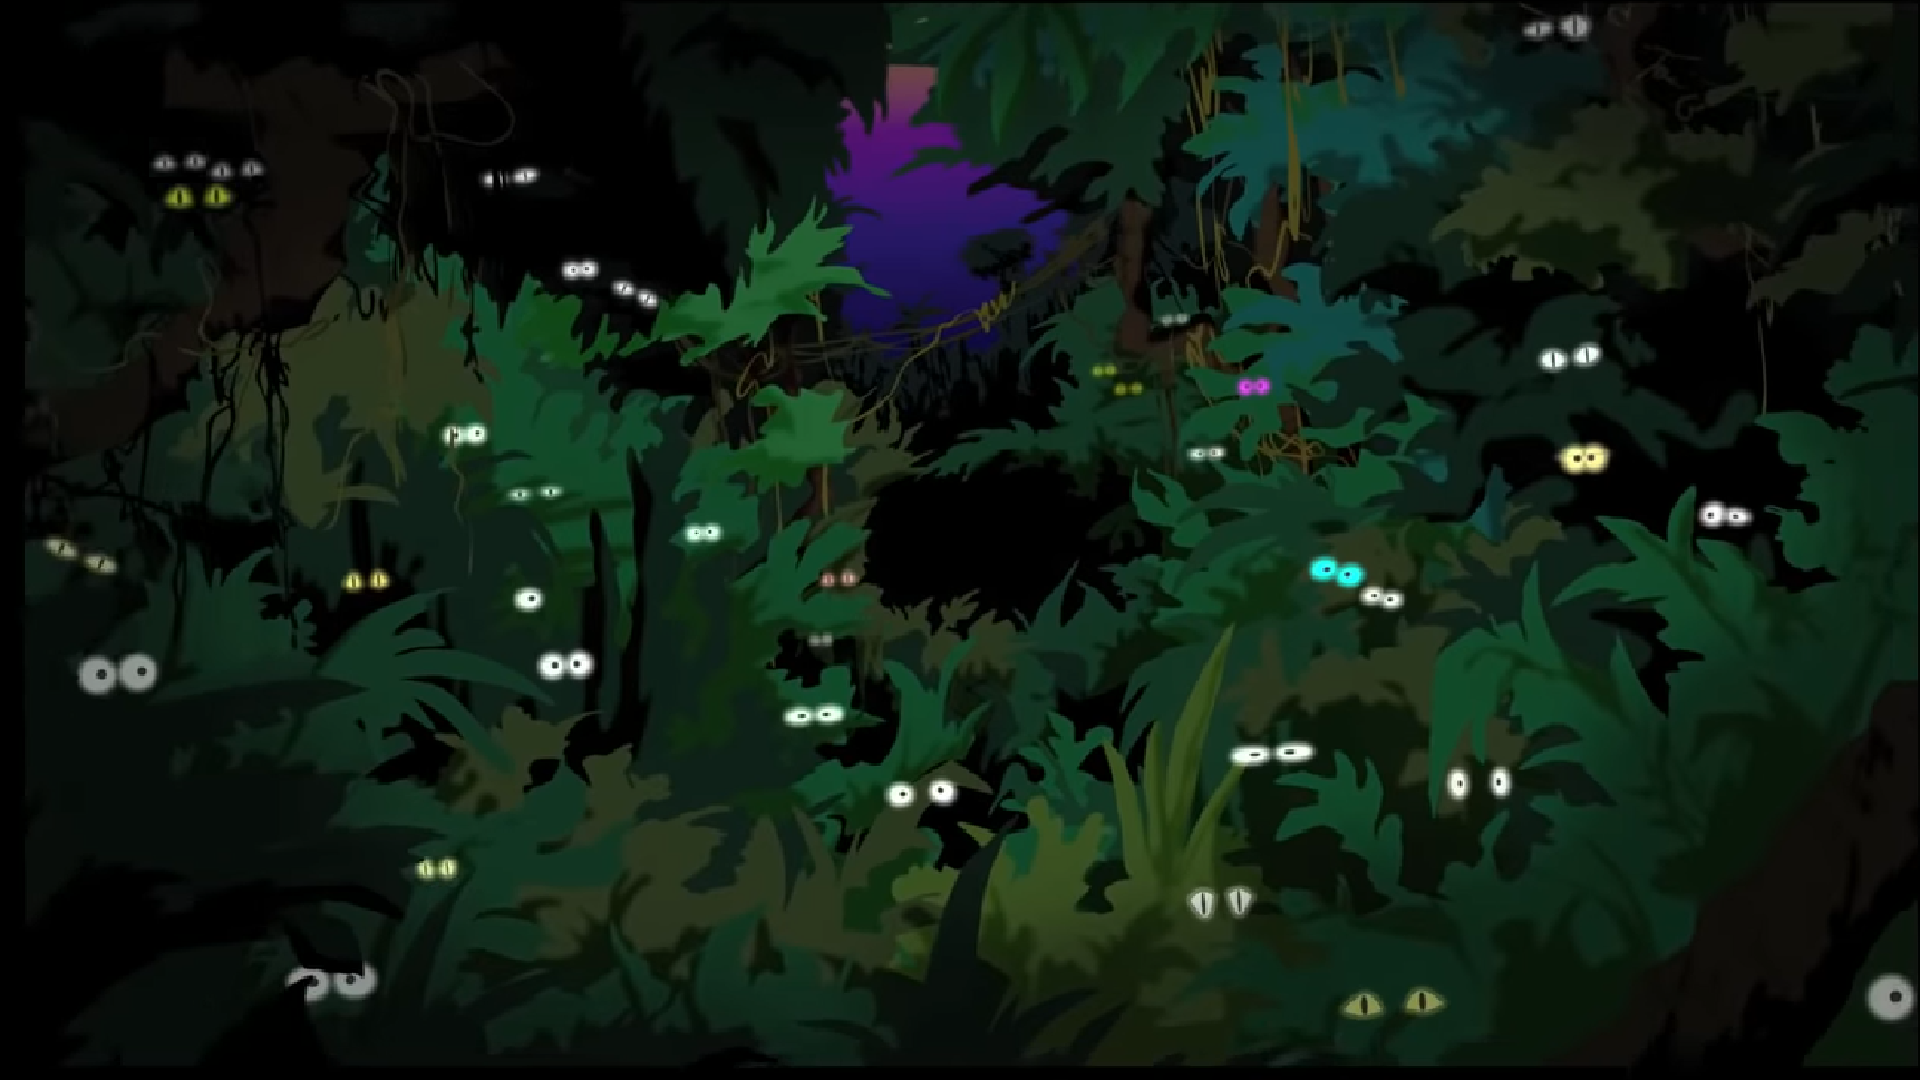 https://vignette.wikia.nocookie.net/vector-stock/images/3/31/Cartoon_Glowing_Eyes_Jungle_Night_Characters.png/revision/latest?cb=20190706050716